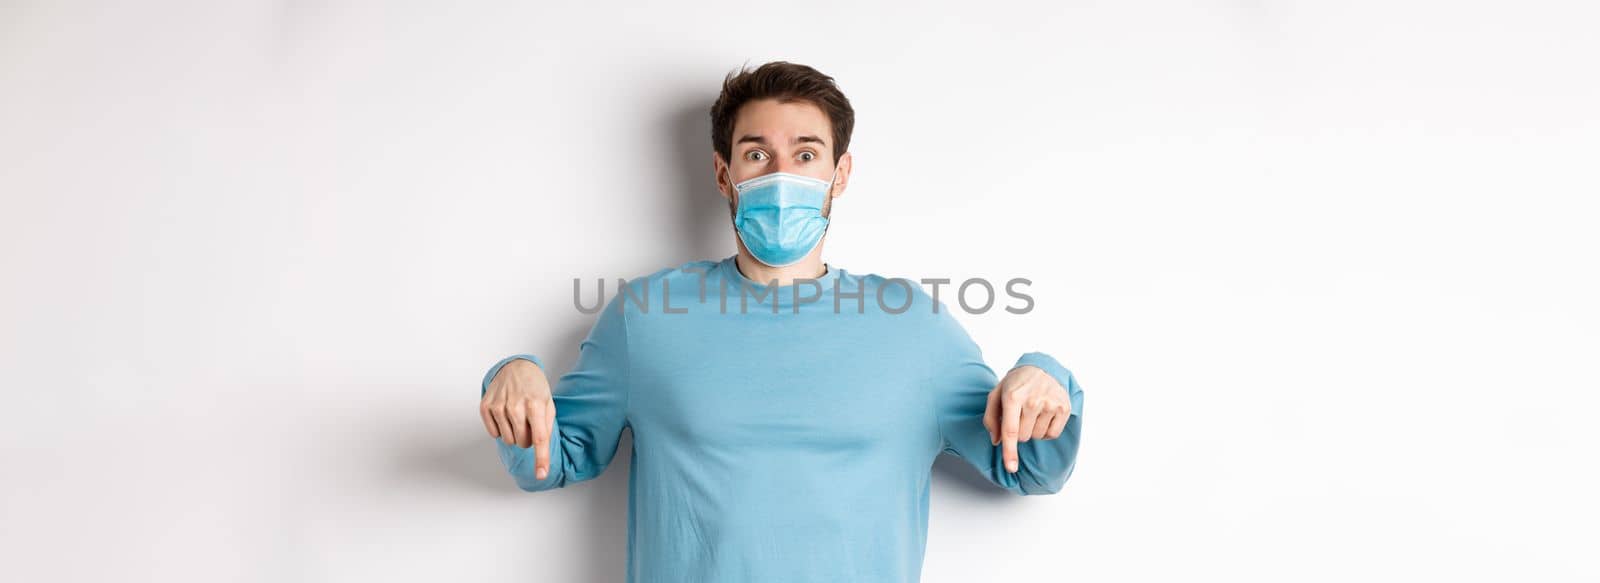 Covid-19, health and quarantine concept. Amazed man checking out promo logo, pointing fingers down, wearing medical mask from coronavirus, white background.